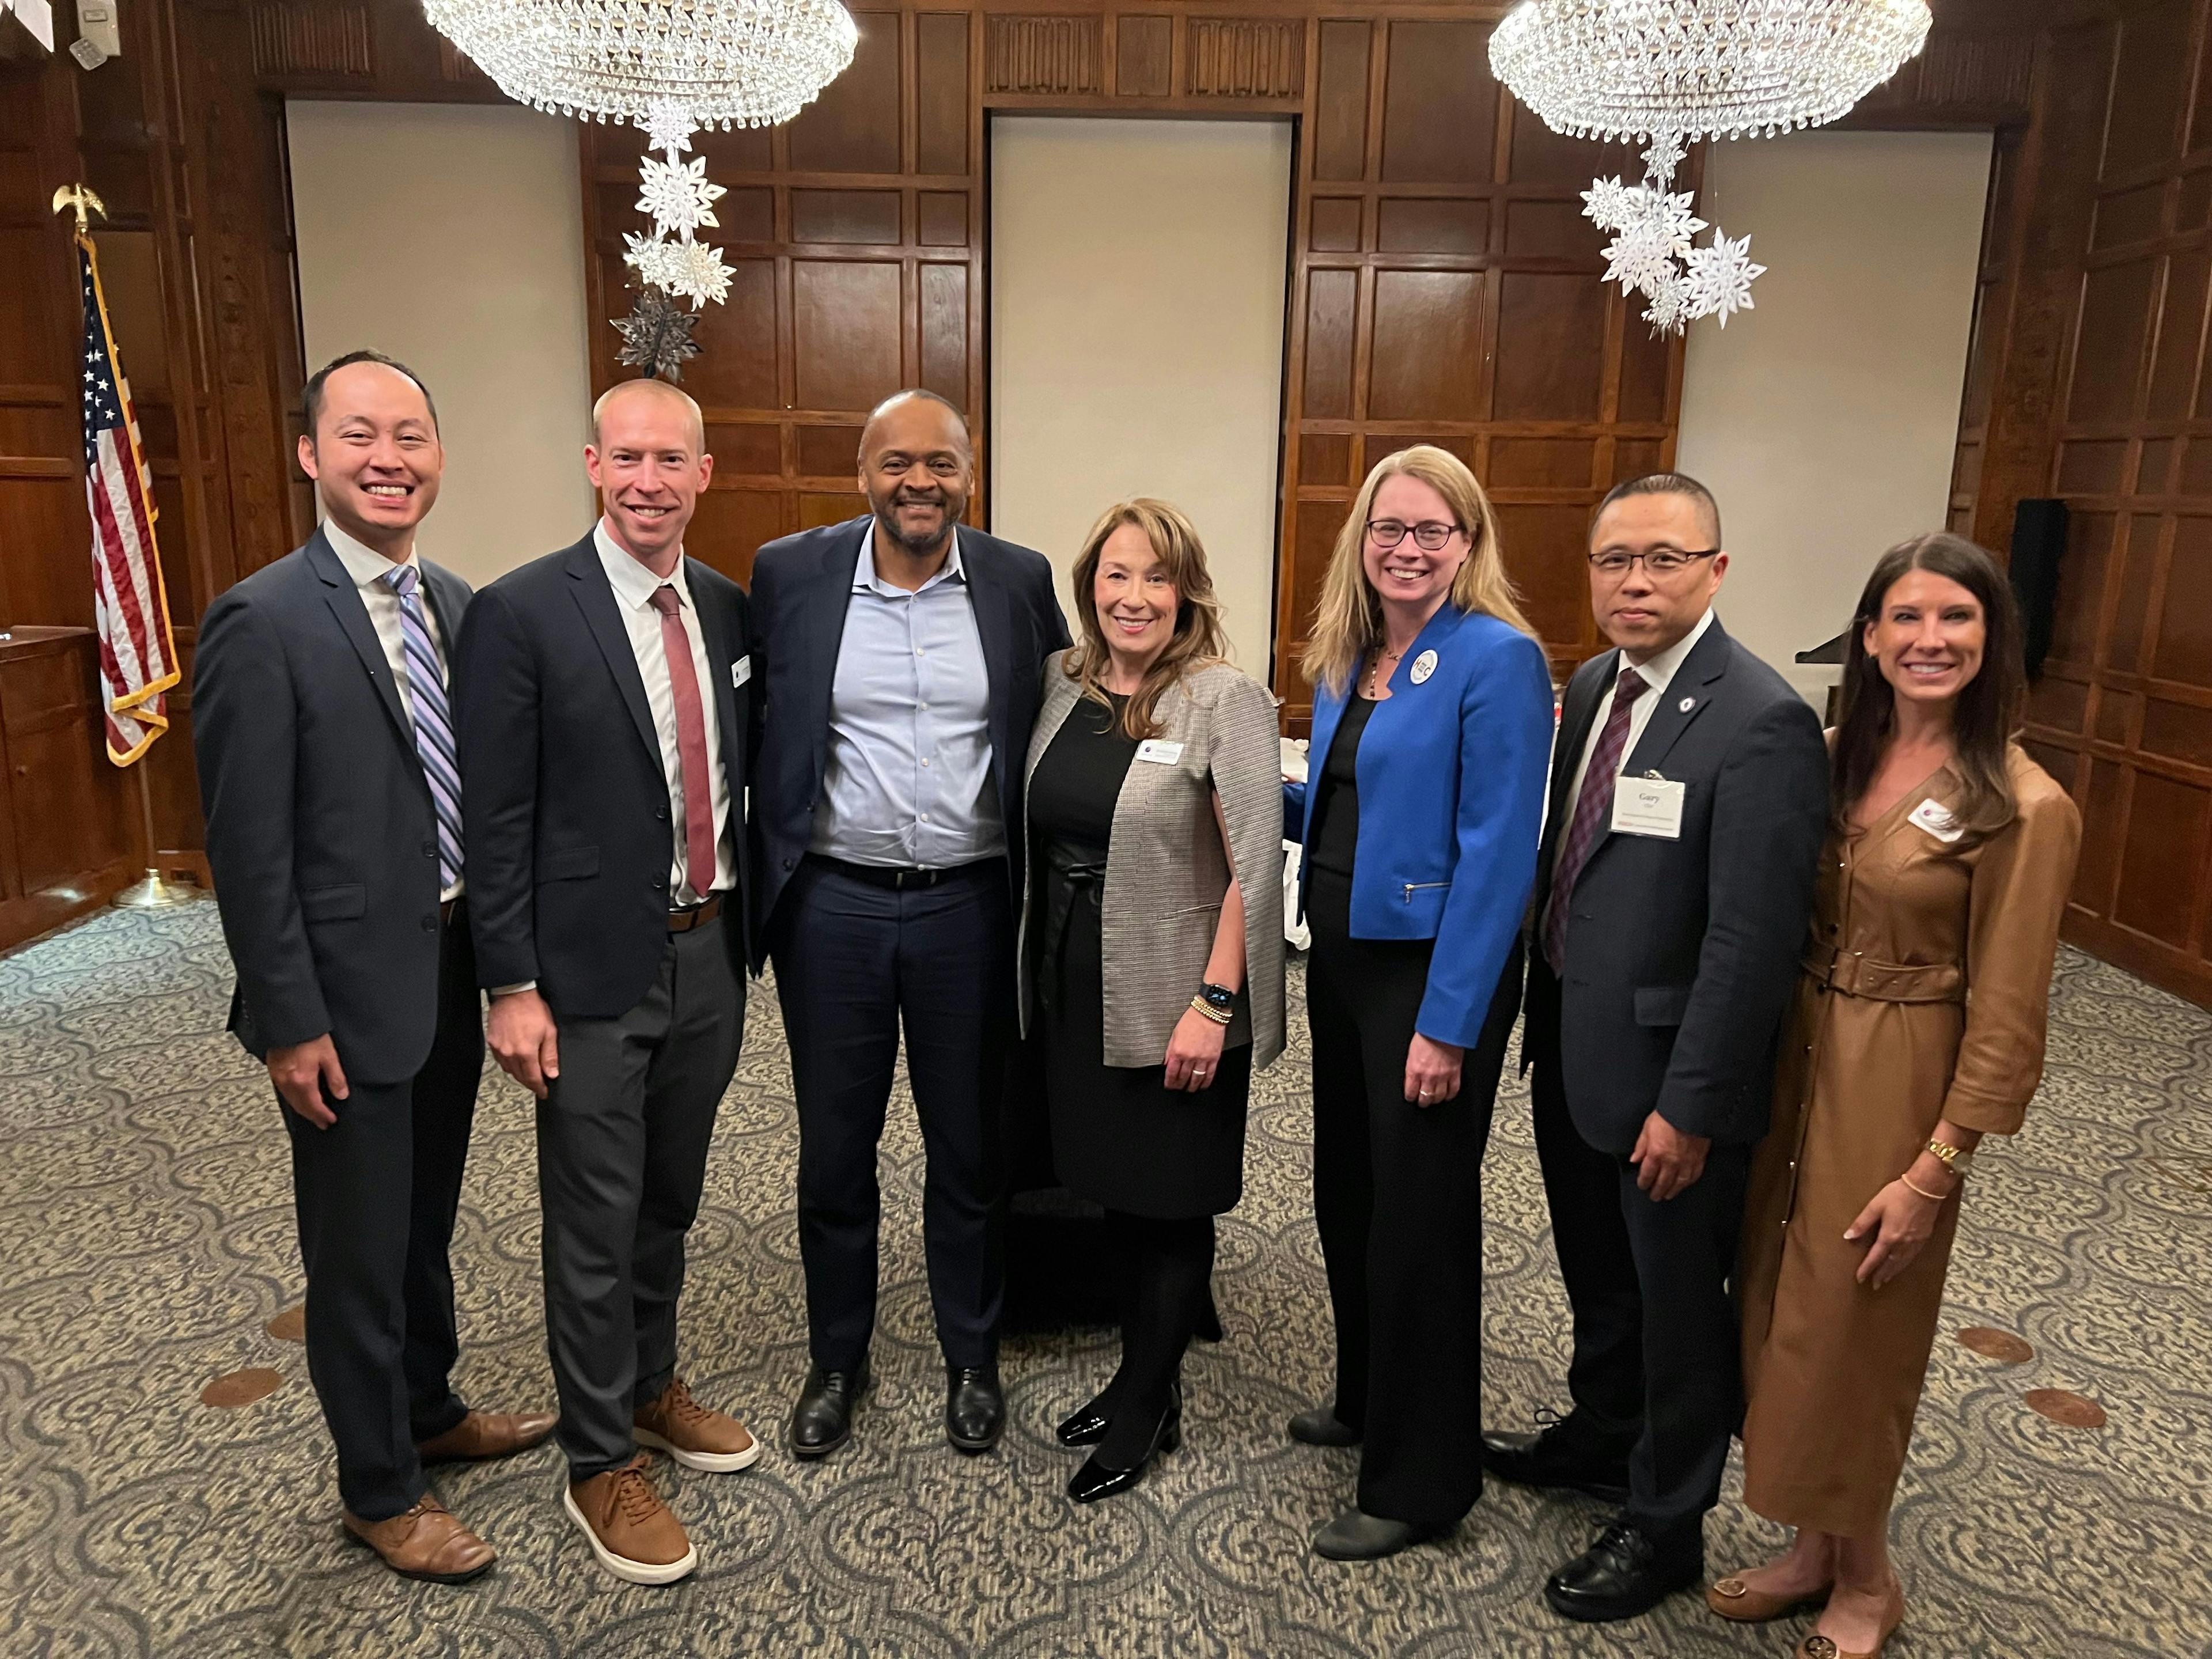 Dr Justin Kwan, CooperVision; Dr Steve Rosinski, CooperVision; Michael Curry, Health Equity Compact; Dr Michele Andrews, CooperVision; Rep. Christine Barber, Commonwealth of Massachusetts; Dr Gary Chu, New England College of Optometry; Dr Felicia Timmermann, CooperVision